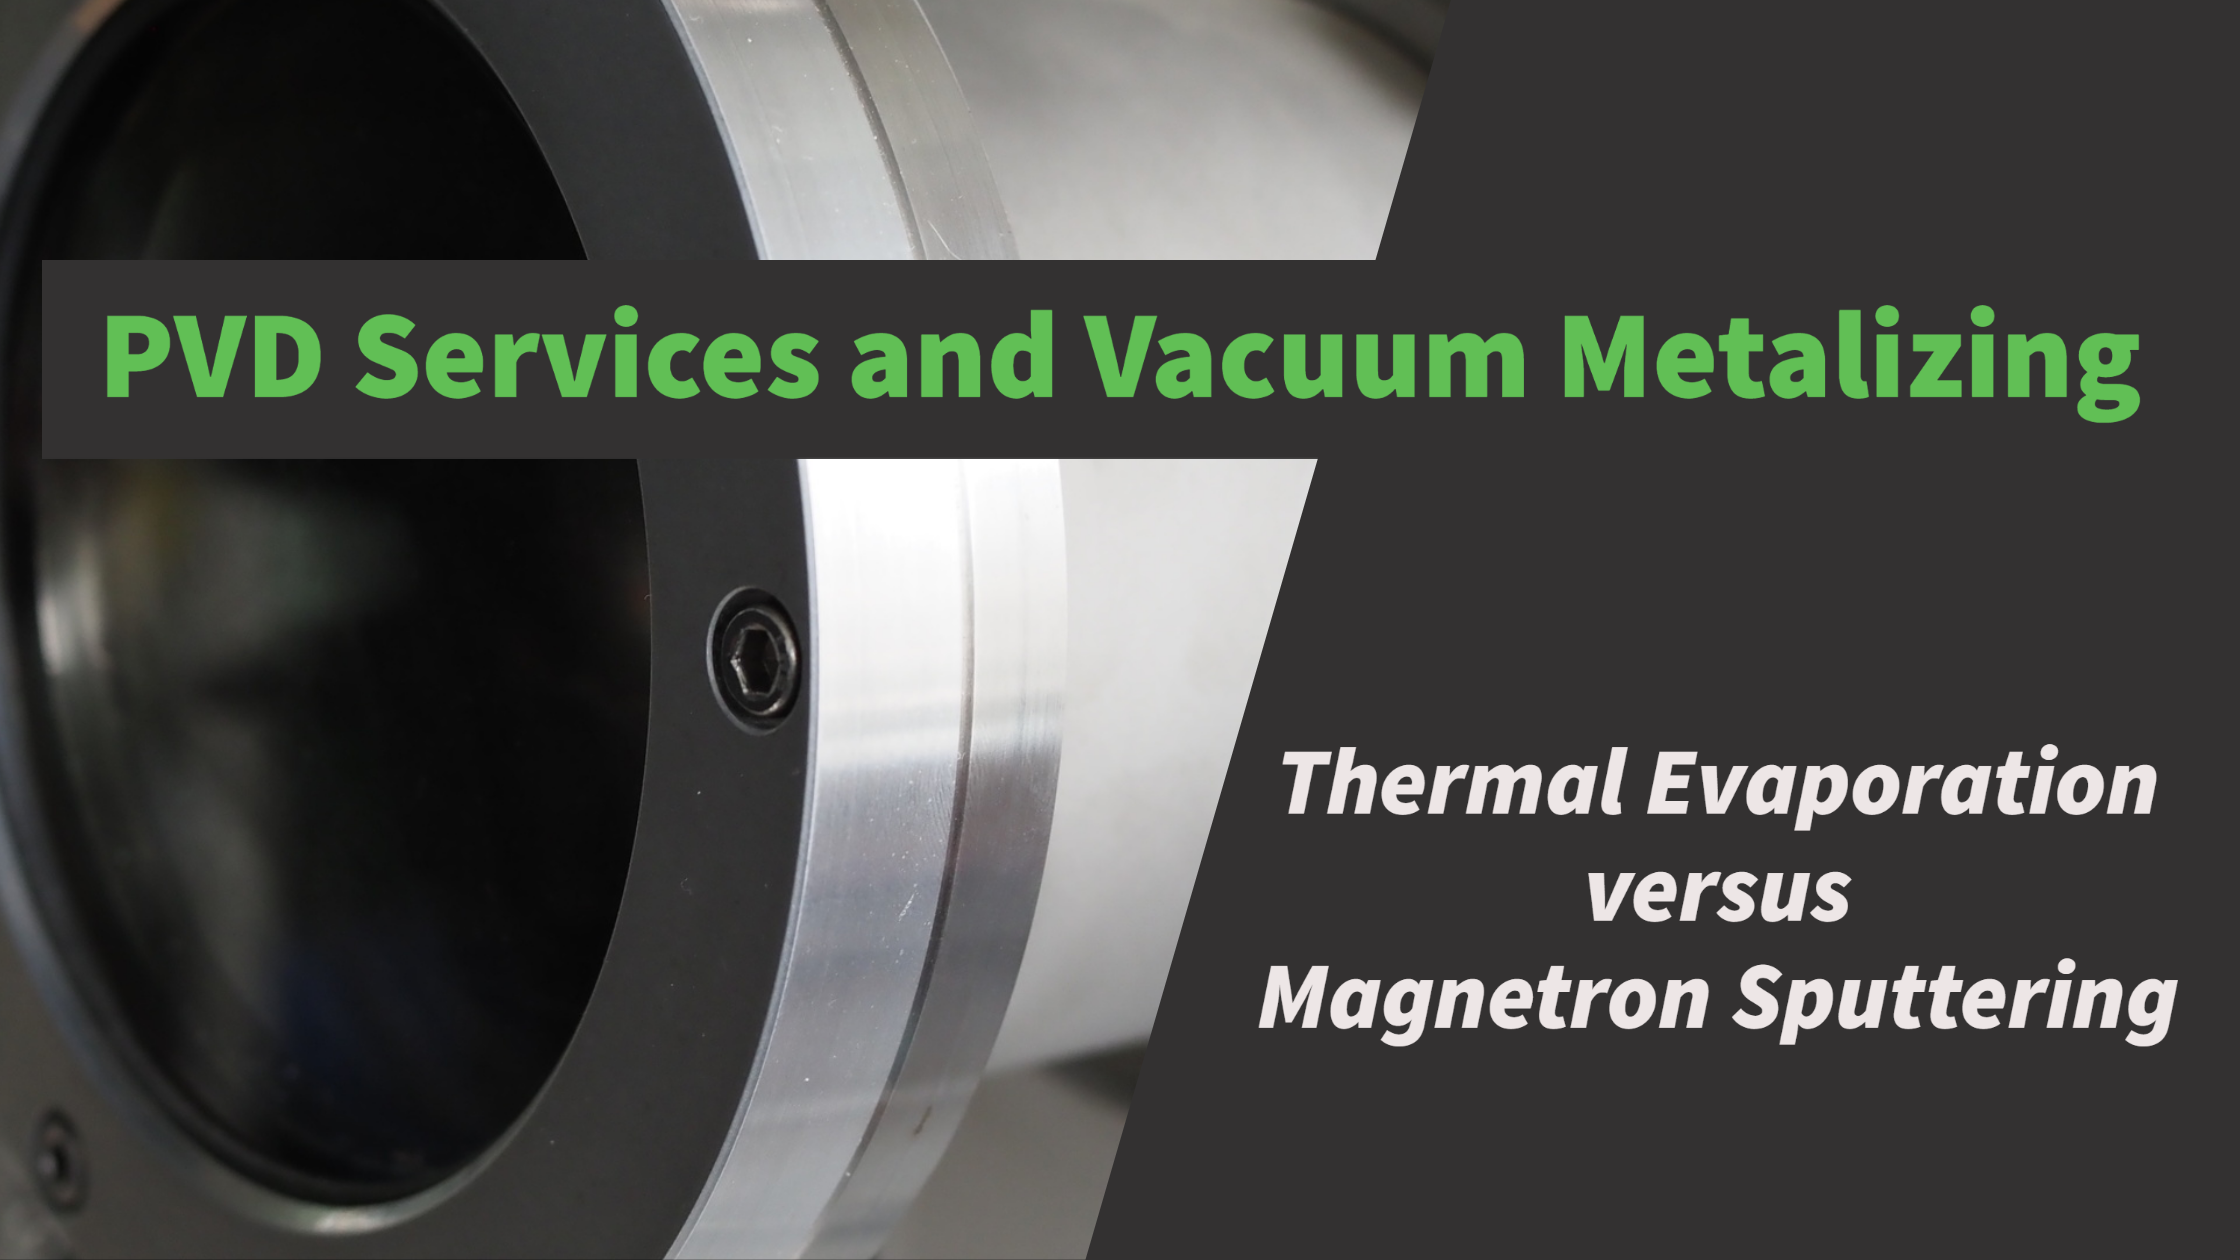 Text: PCF services and vacuum metalizing. subheader: Thermal evaporation versus magnetron sputtering